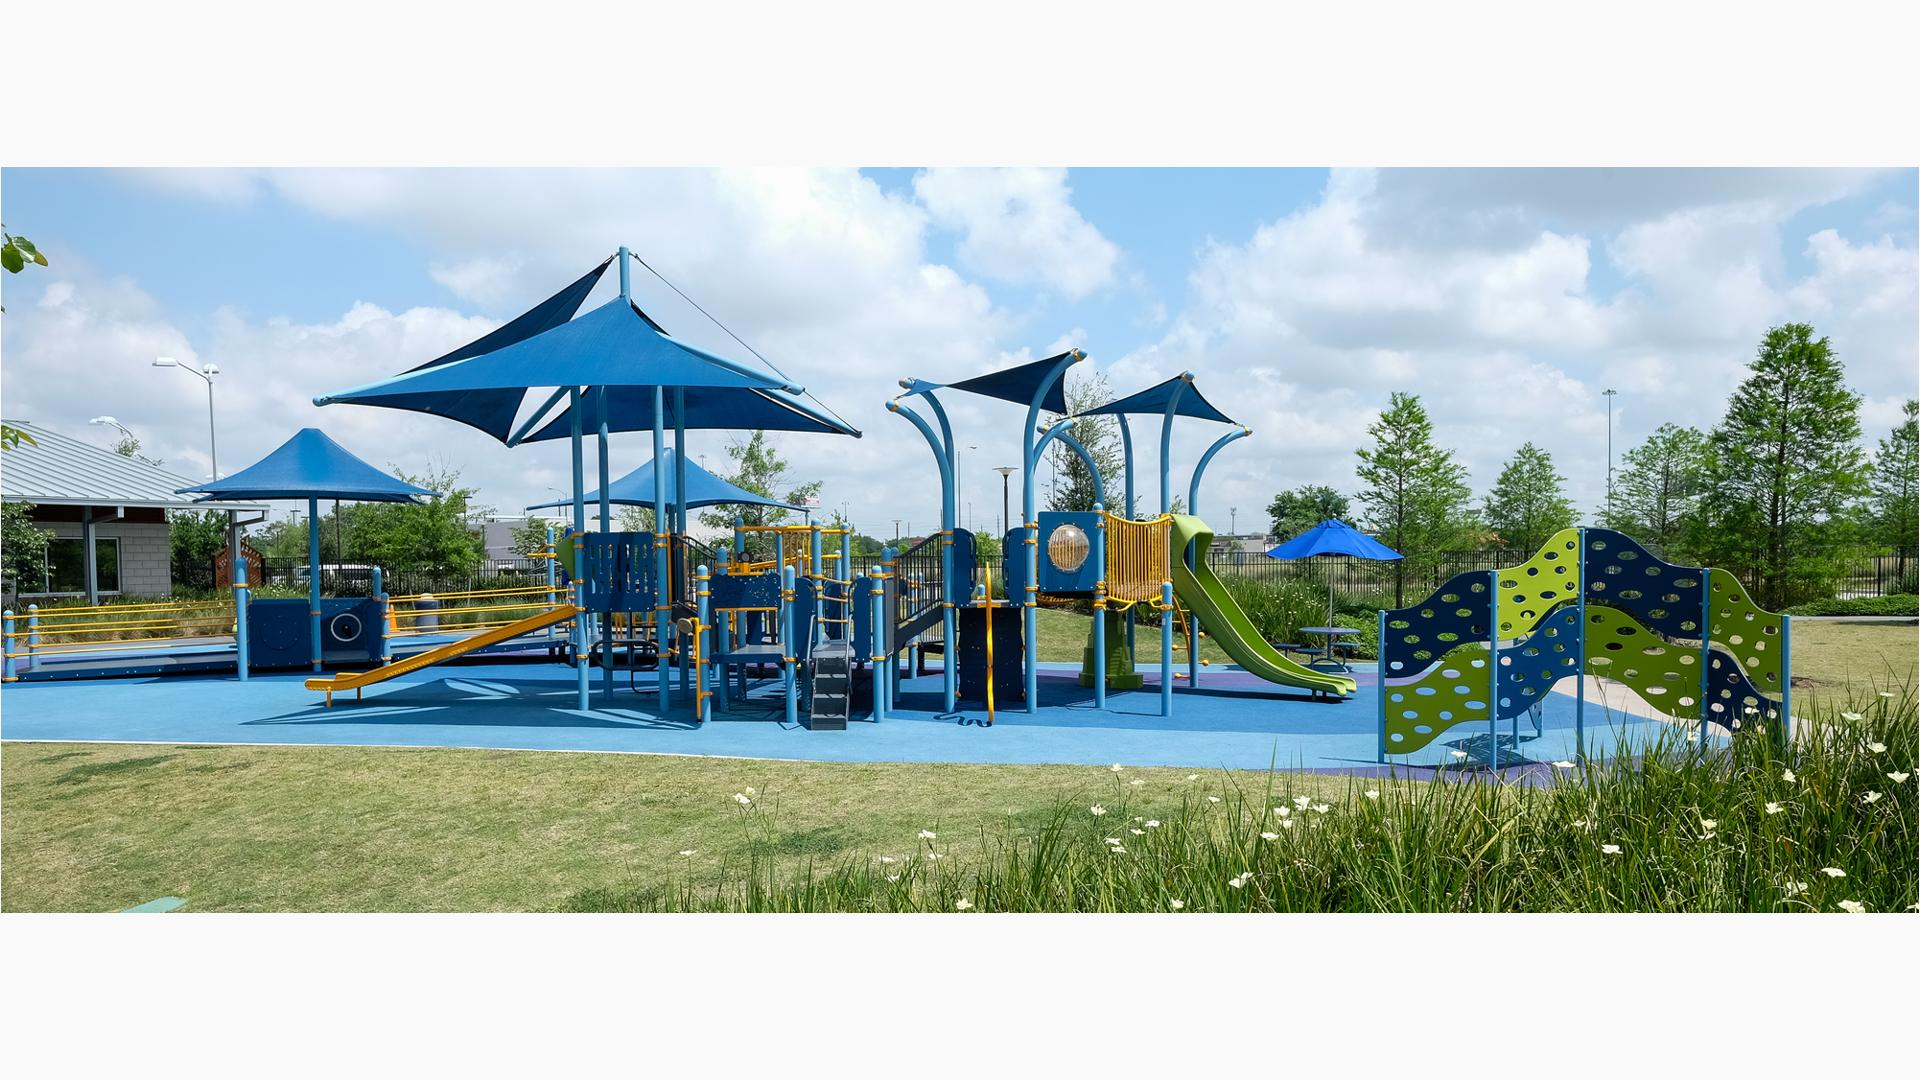 Dylan Park is home to a brightly colored PlayBooster® playstructure featuring the Sway Fun® Glider, Rollerslide and OmniSpin® Spinner. The Cascade Climber and a Sensory Play Center® and several CoolToppers® shade products.